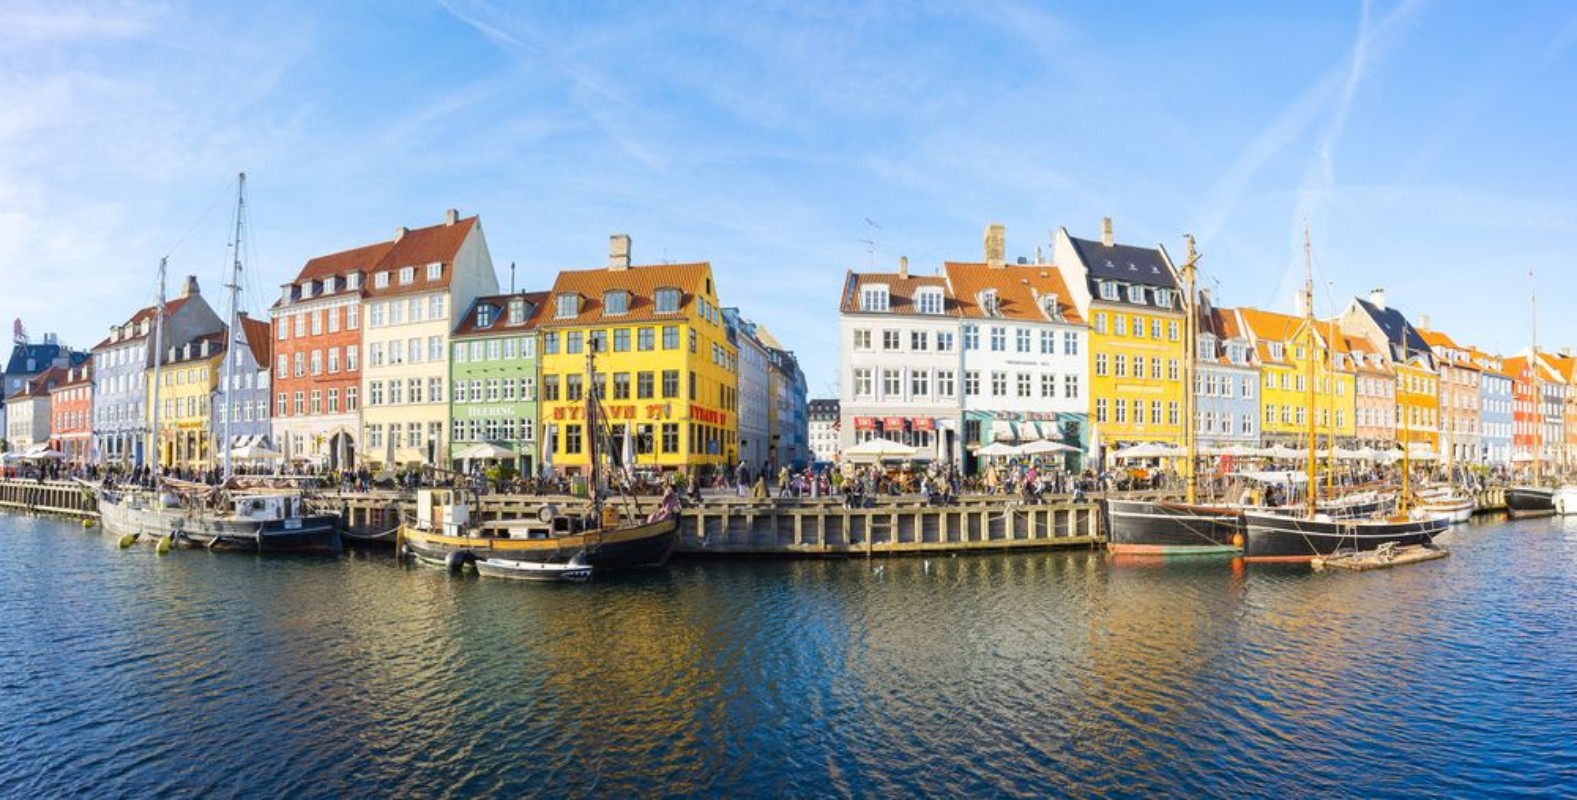 Image de Nyhavn with its picturesque harbor and colorful facades of old houses in Copenhagen Denmark